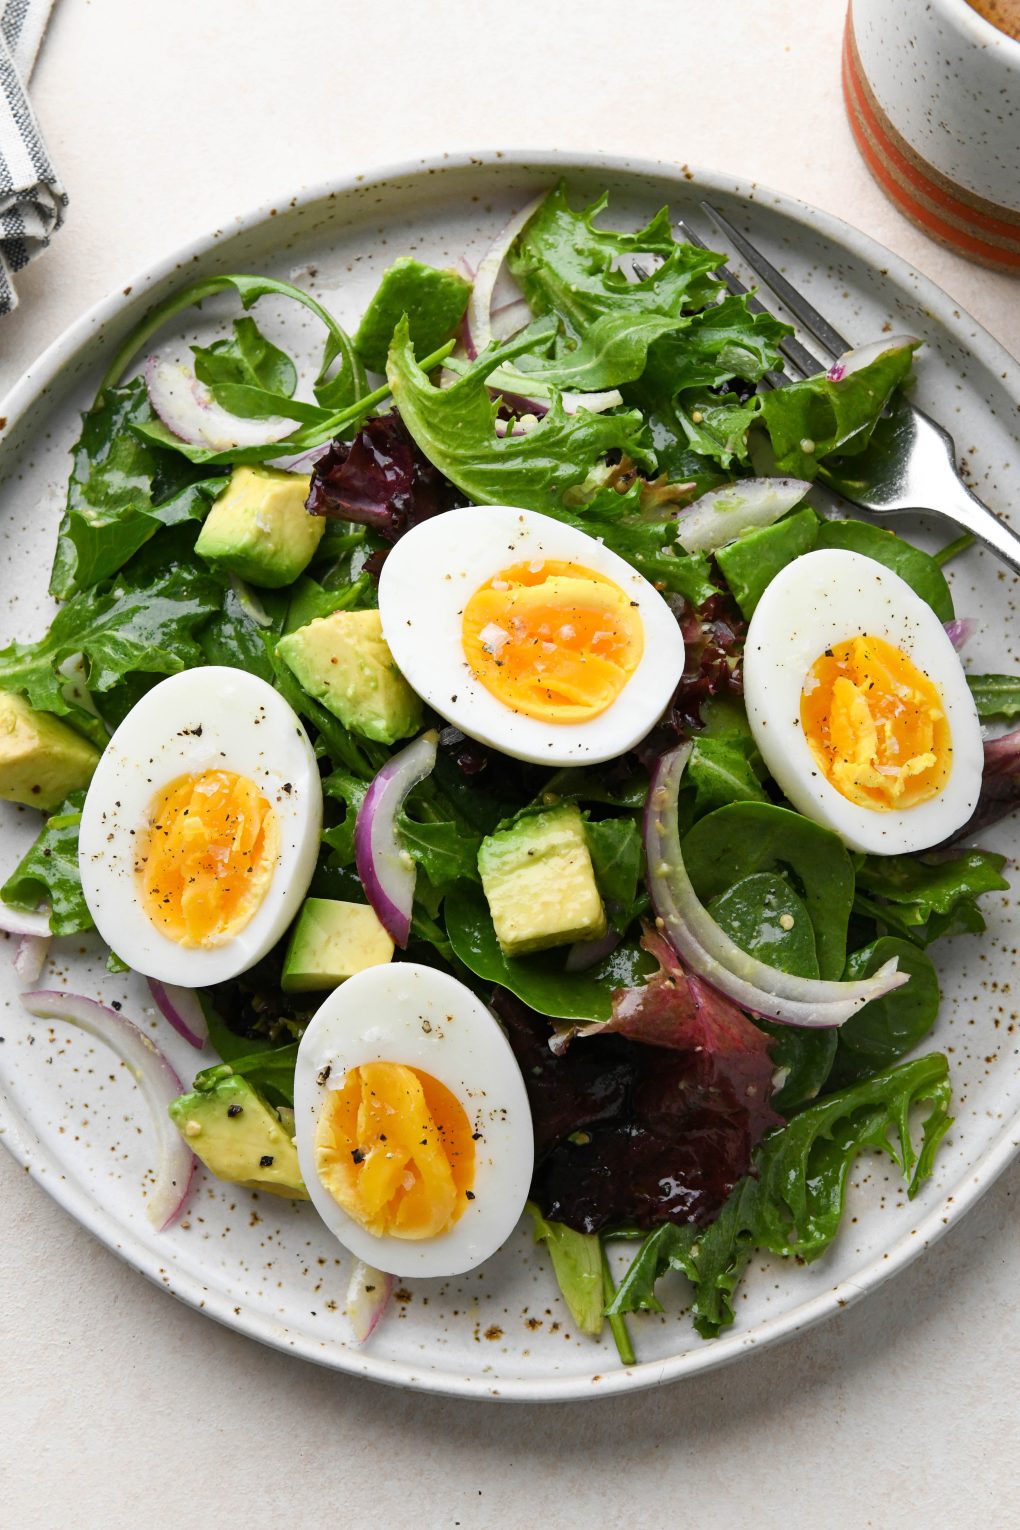 Hard boiled eggs over a simple green salad with avocado.